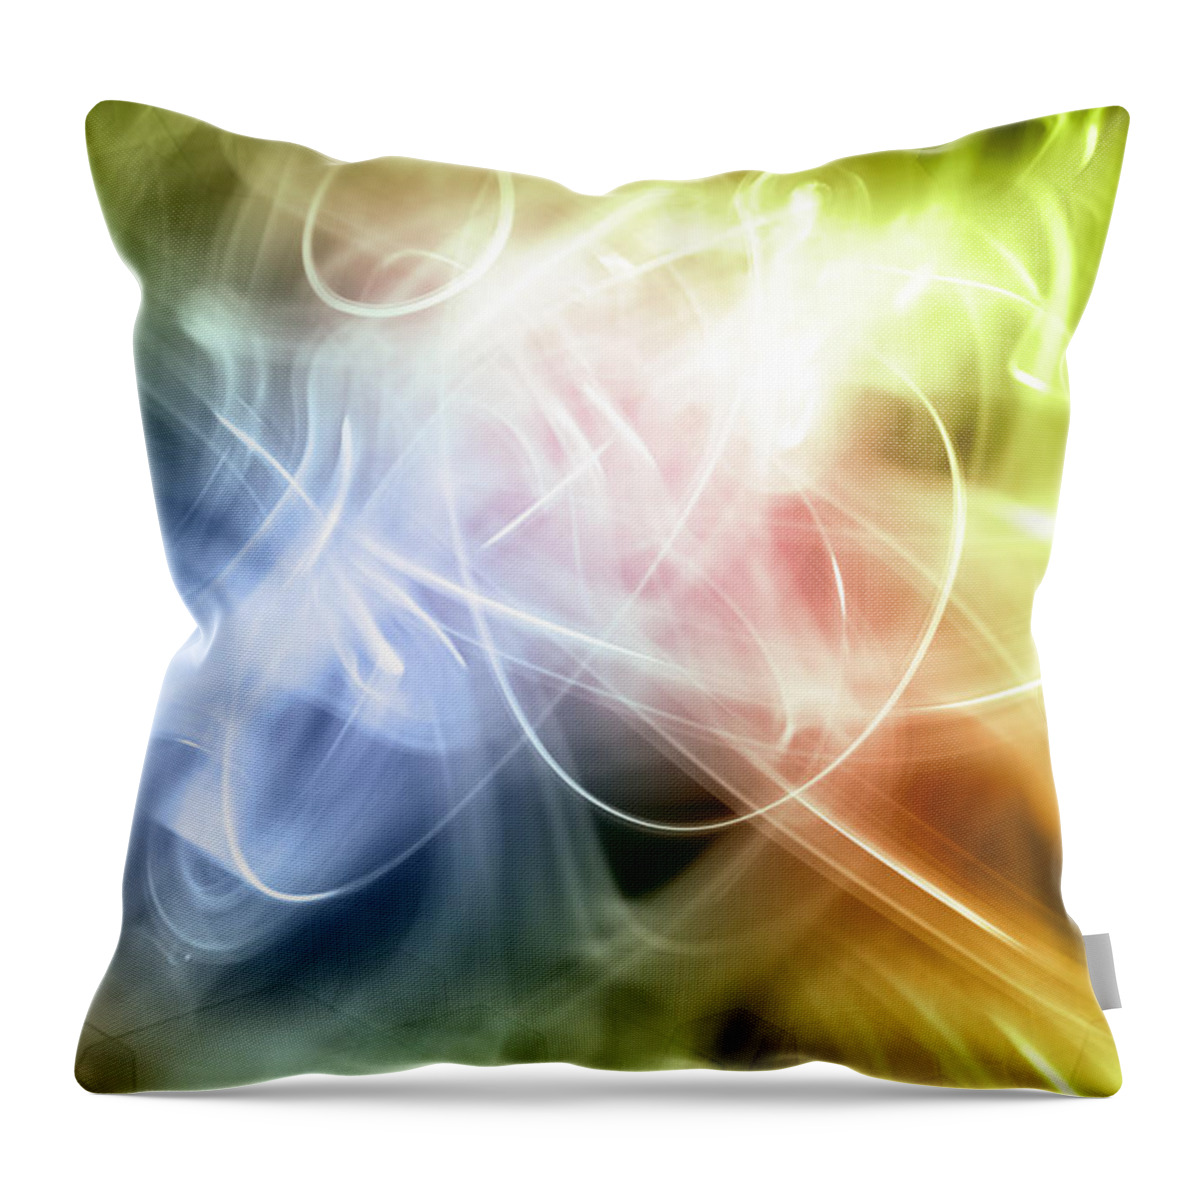 Green Throw Pillow featuring the photograph Abstract background by Les Cunliffe